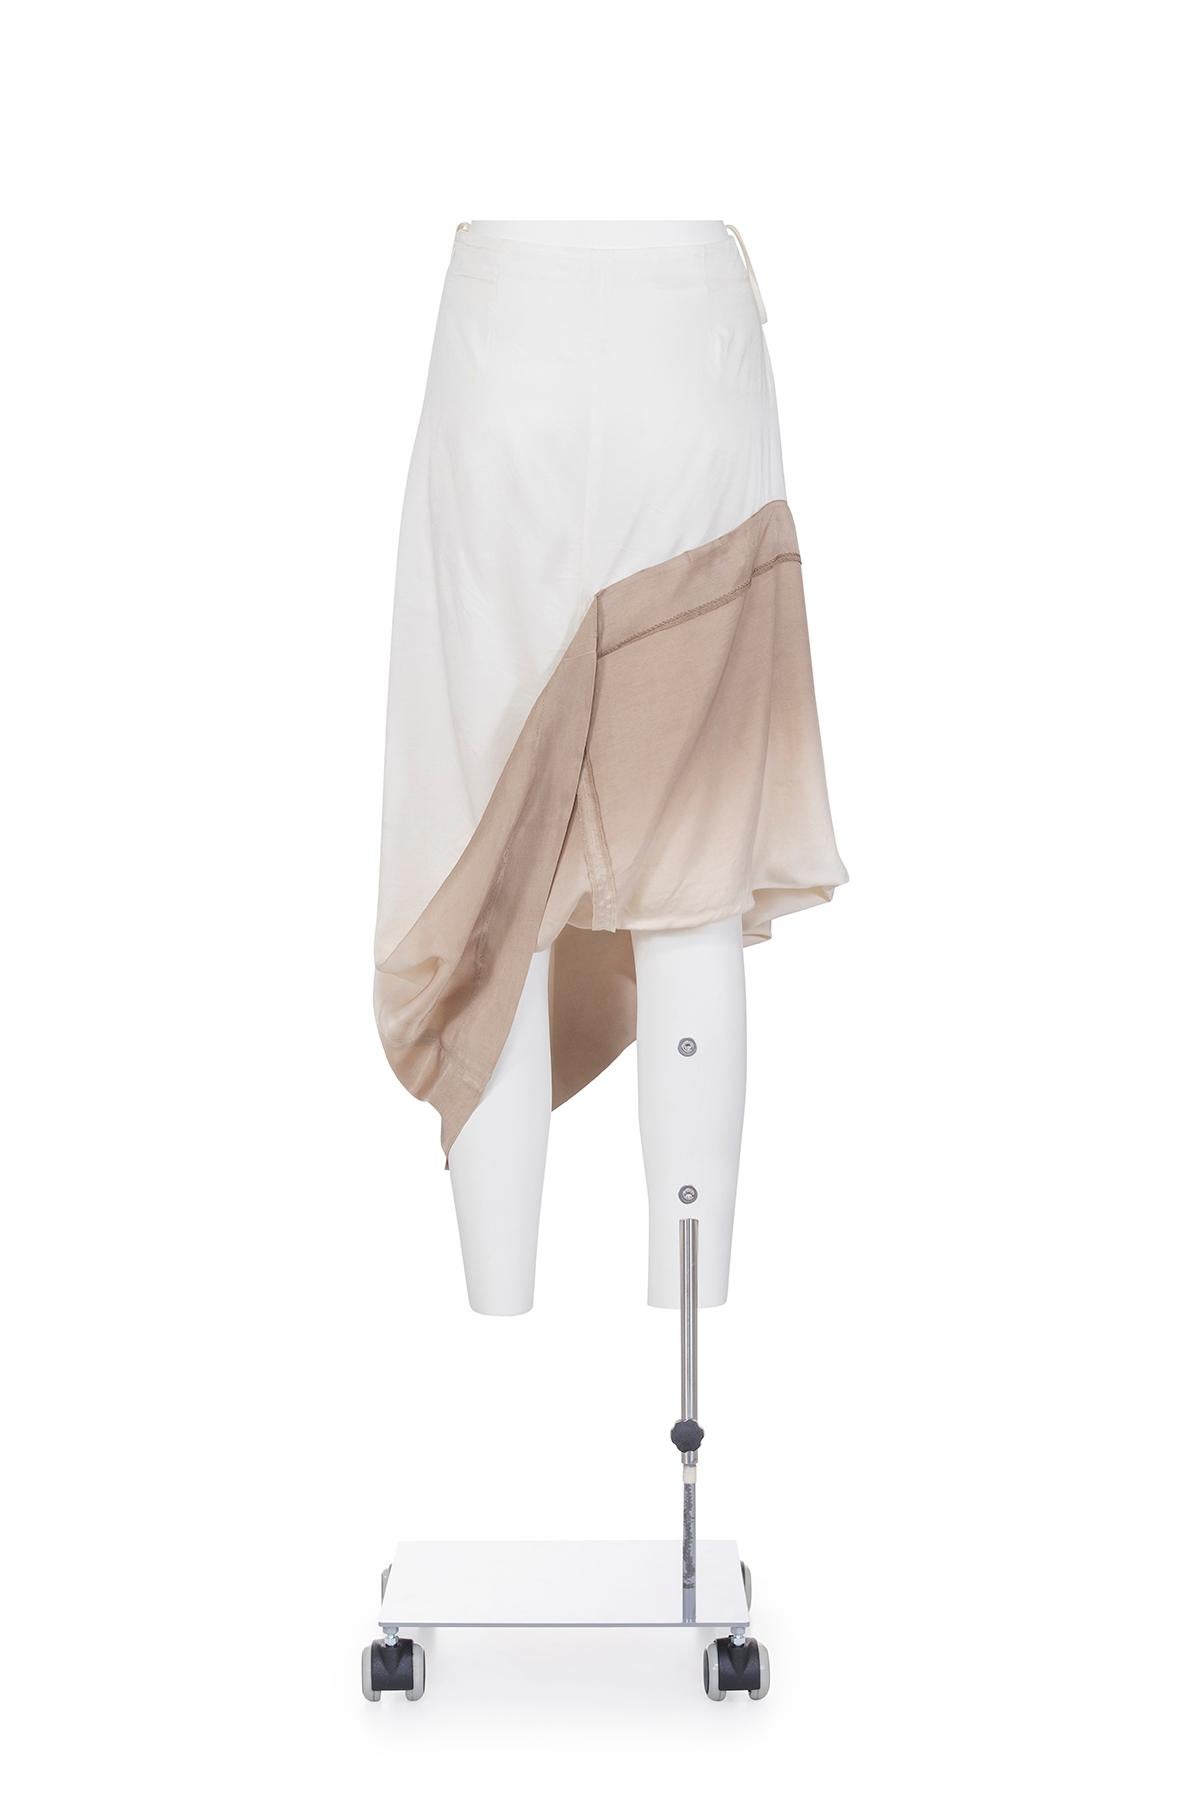 MAISON MARTIN MARGIELA SS 03 Iconic Shaded Hitched Up Skirt For Sale 1